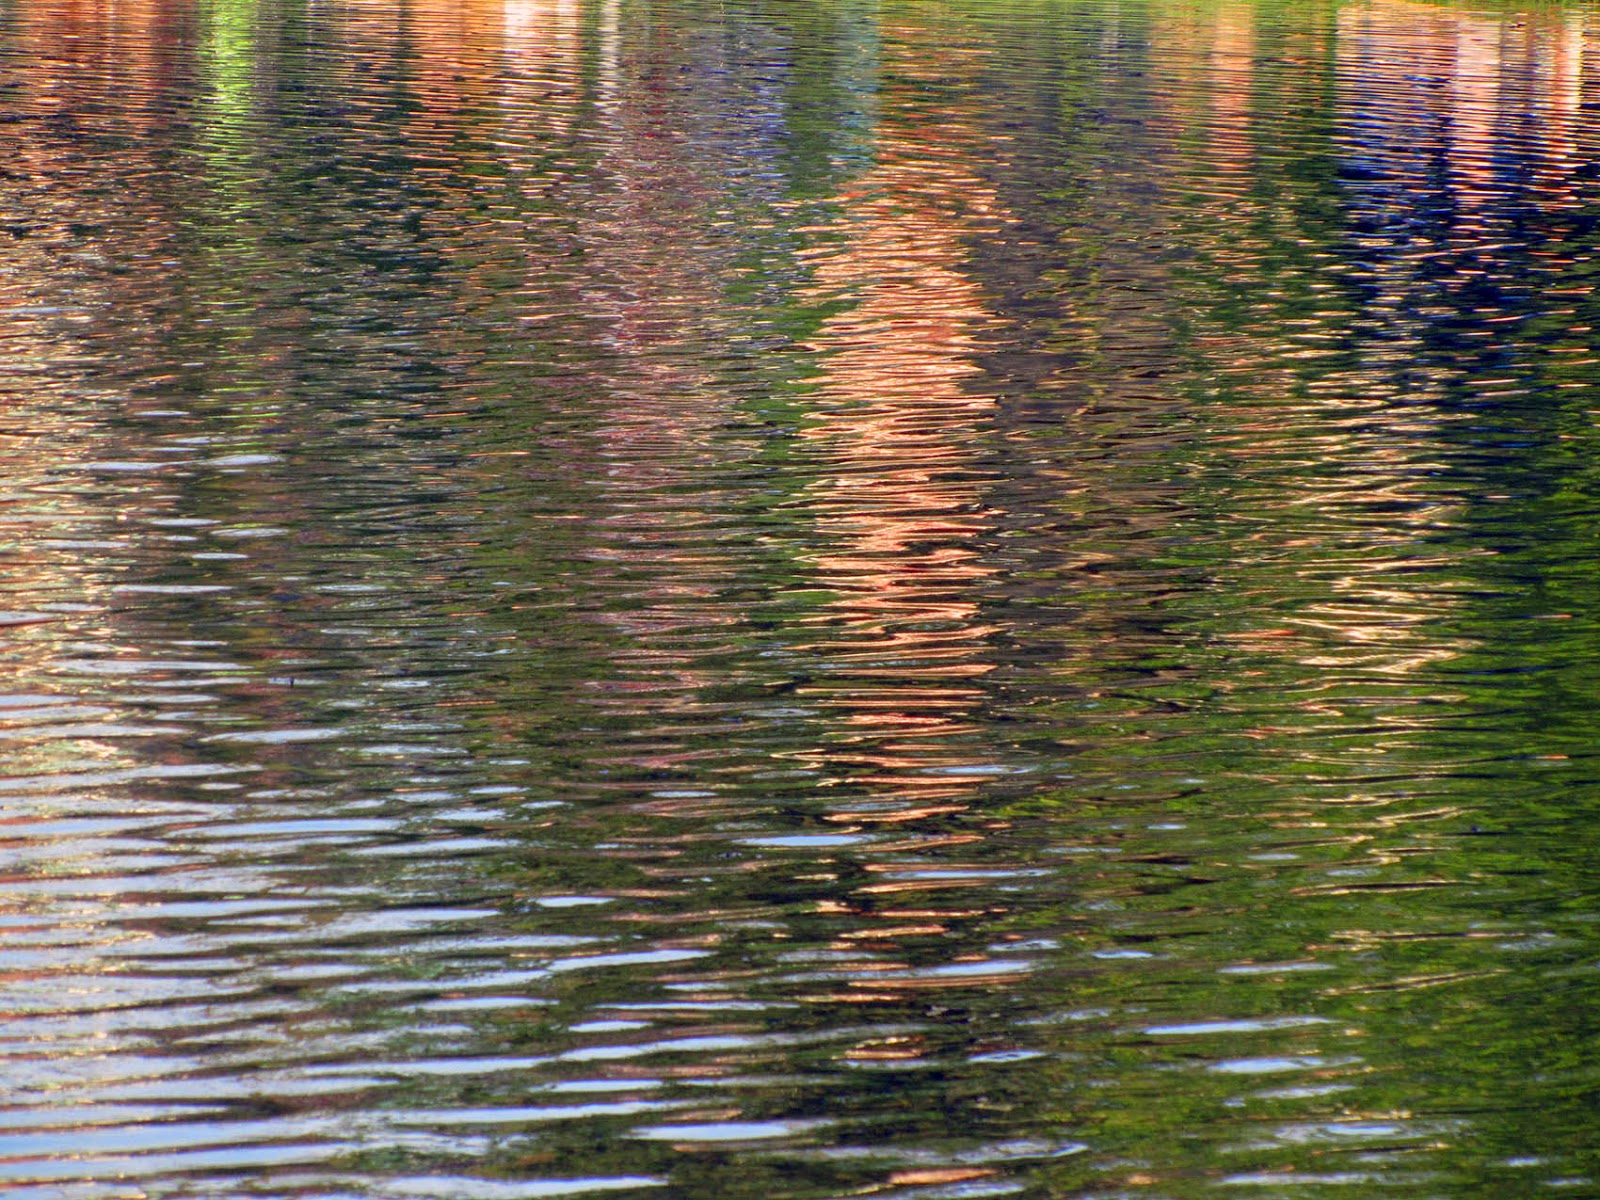 reflections of buildings in a pond